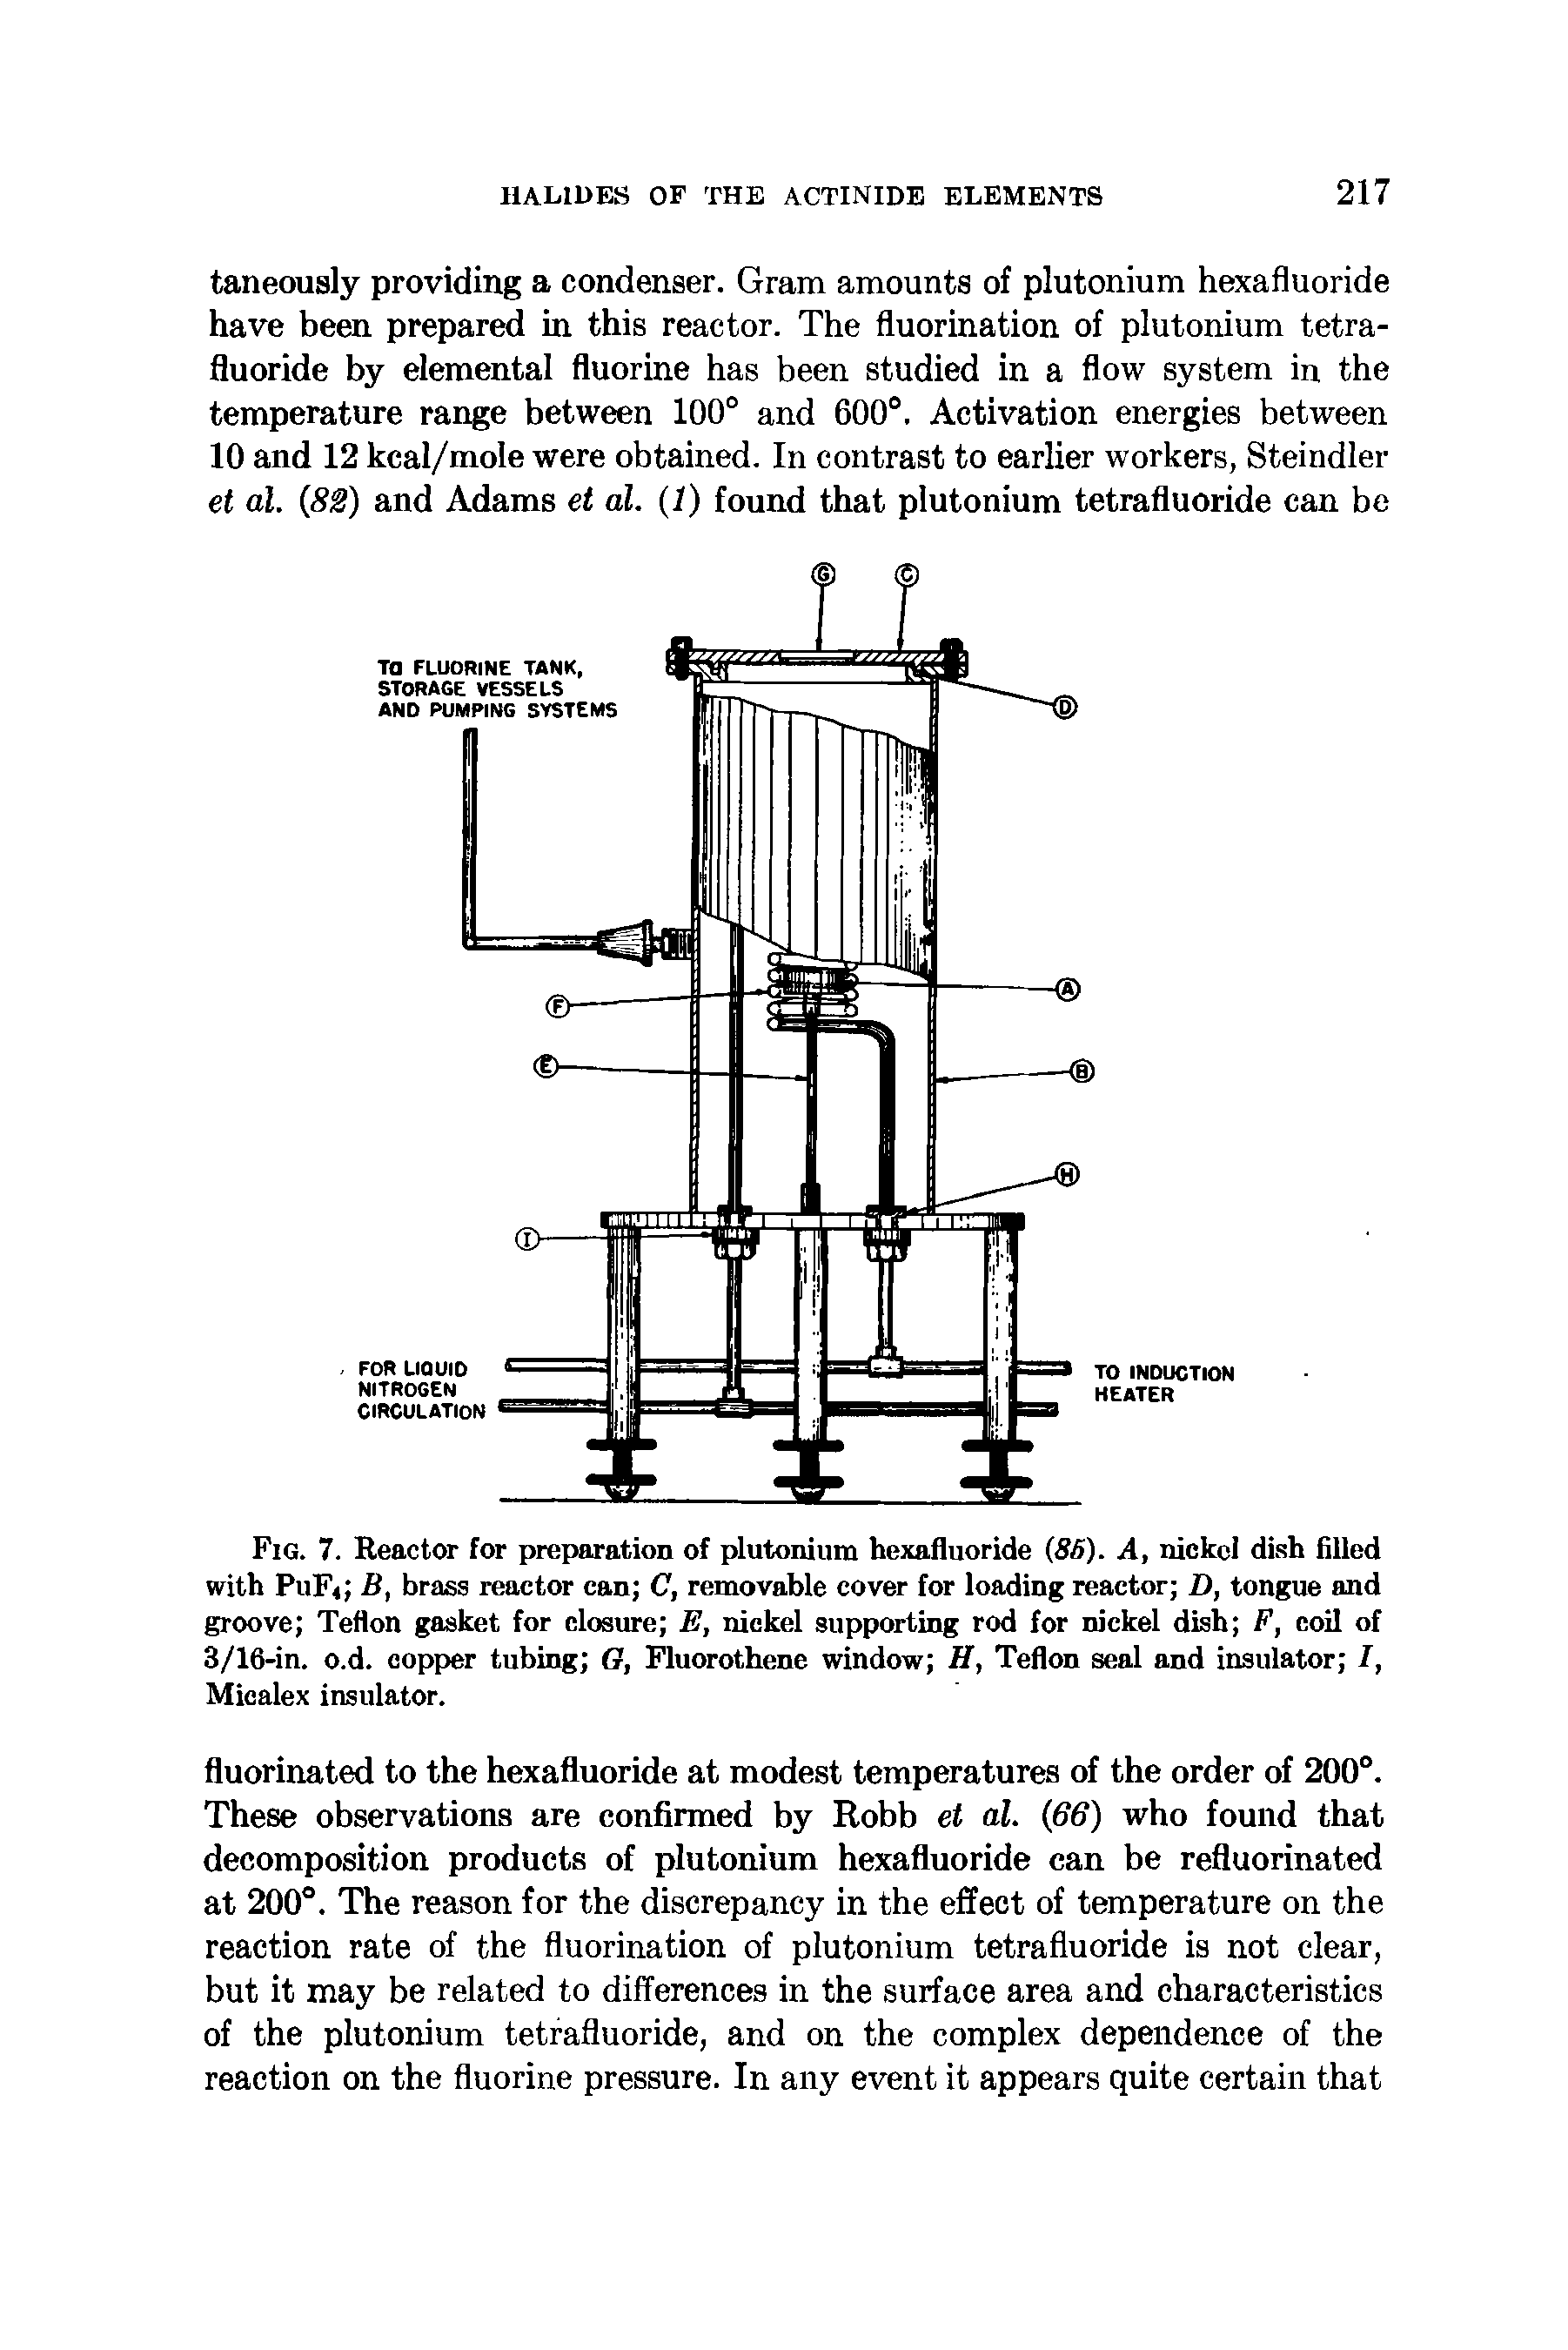 Fig. 7. Reactor for preparation of plutonium hexafluoride (86). A, nickel dish filled with PuF< B, brass reactor can C, removable cover for loading reactor D, tongue and groove Teflon gasket for closure E, nickel supporting rod for nickel dish F, coil of 3/16-in. o.d. copper tubing G, Fluorothene window H, Teflon seal and insulator I, Micalex insulator.